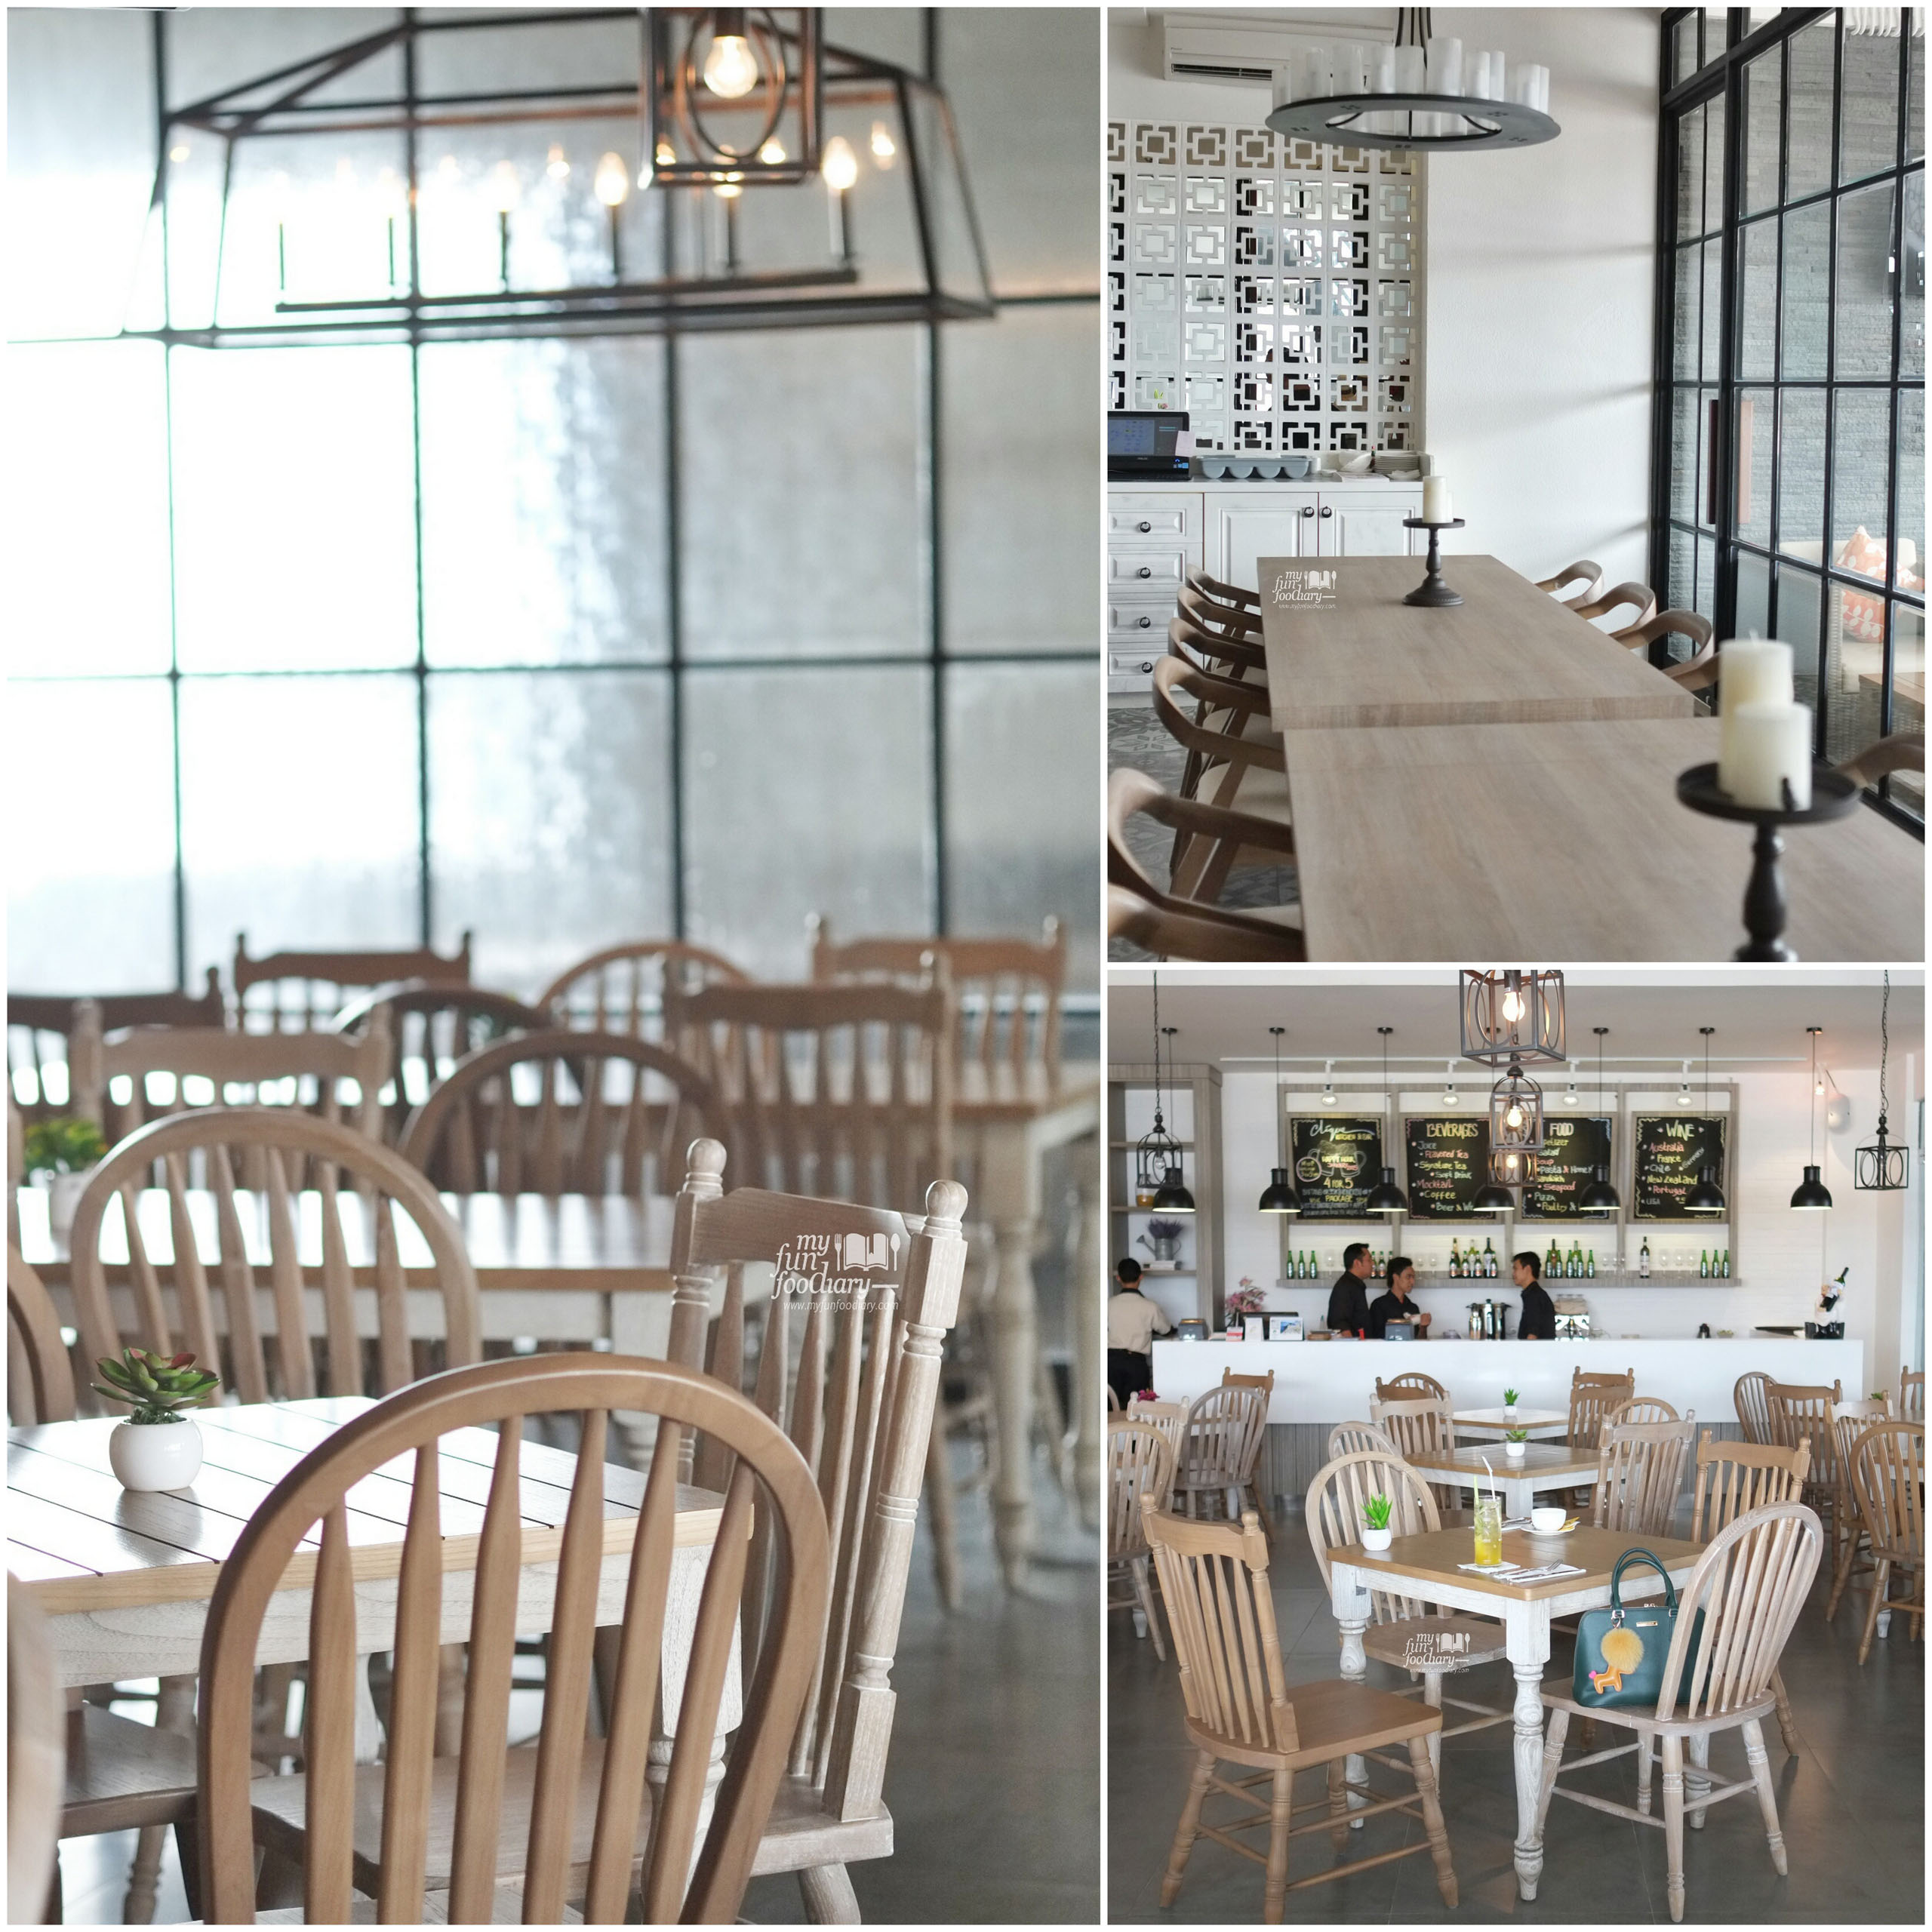 Ambiance indoor at Clique Kitchen and Bar by Myfunfoodiary collage